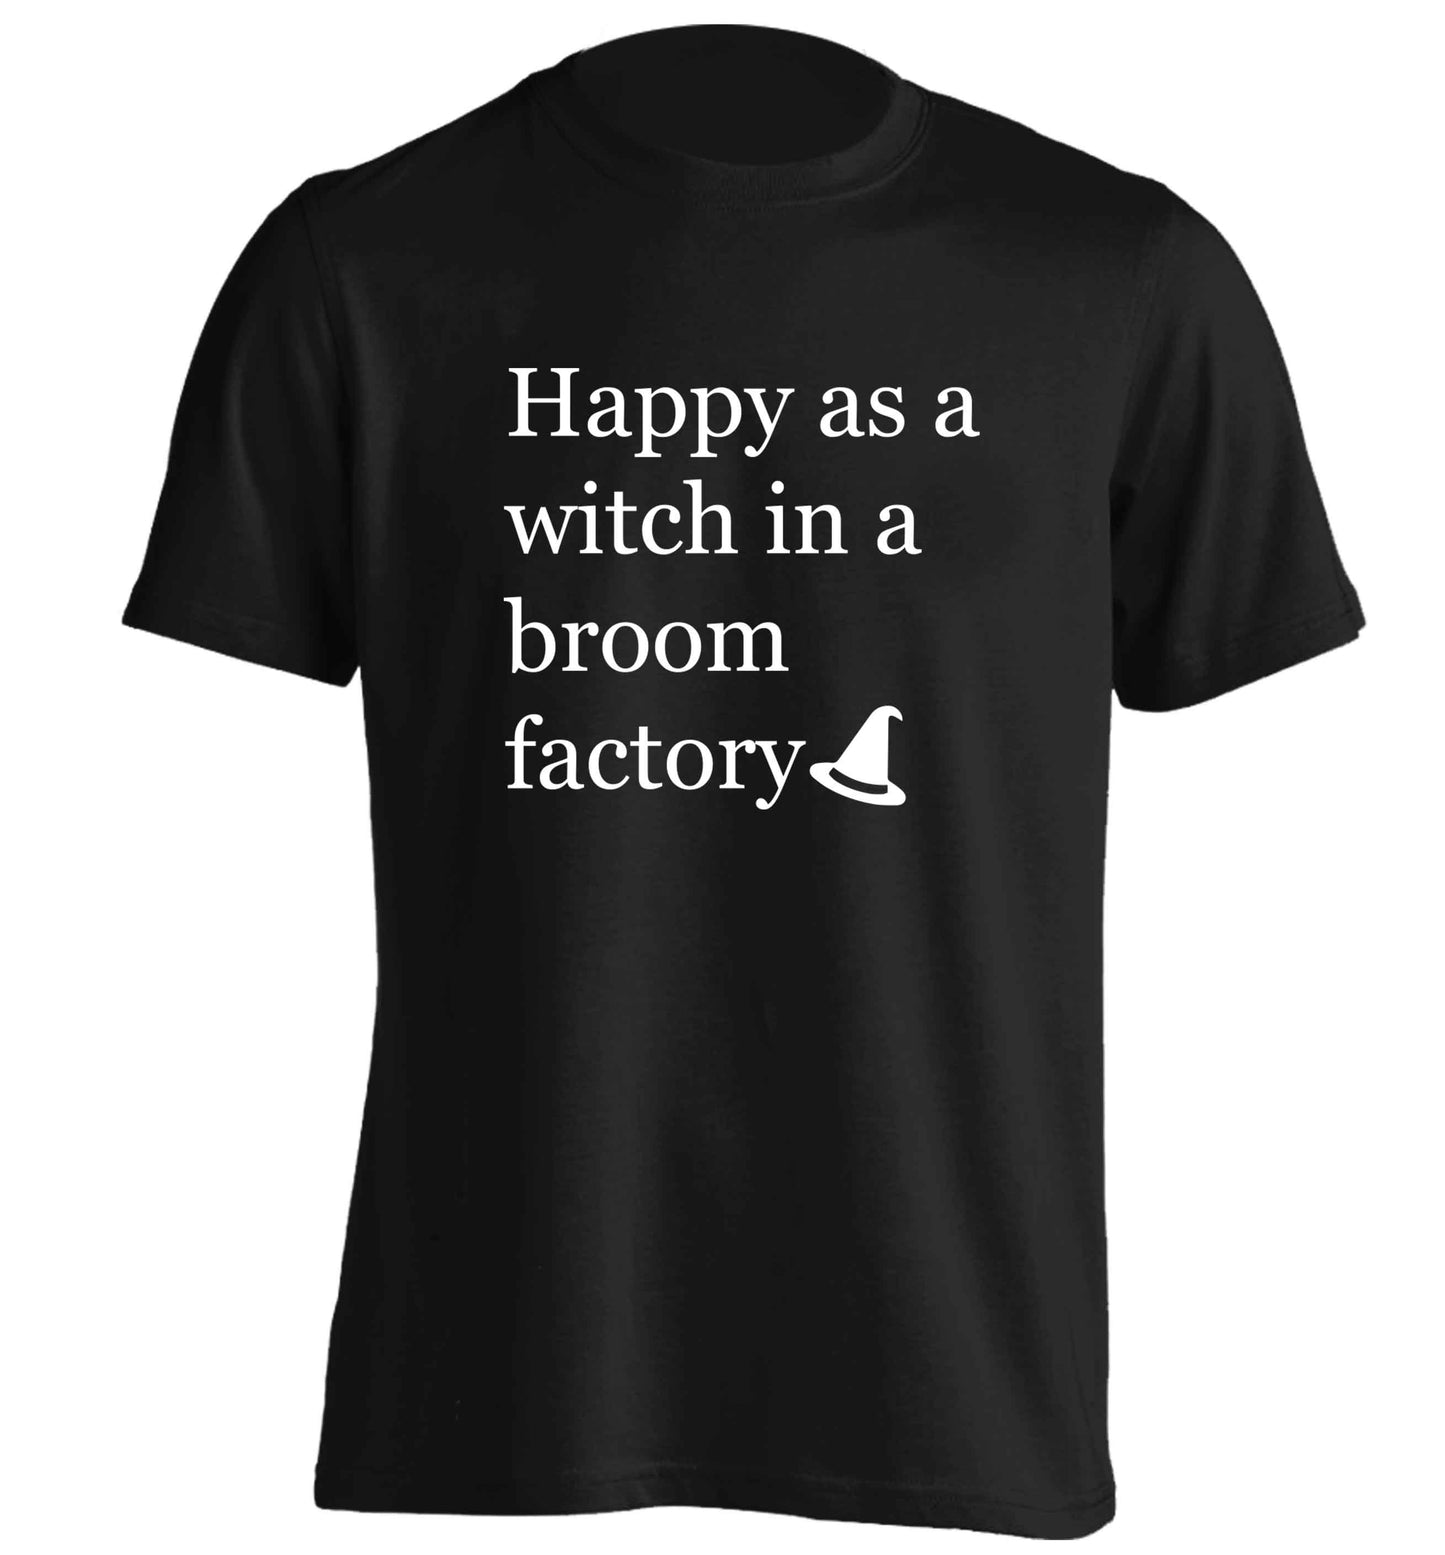 Happy as a witch in a broom factory adults unisex black Tshirt 2XL